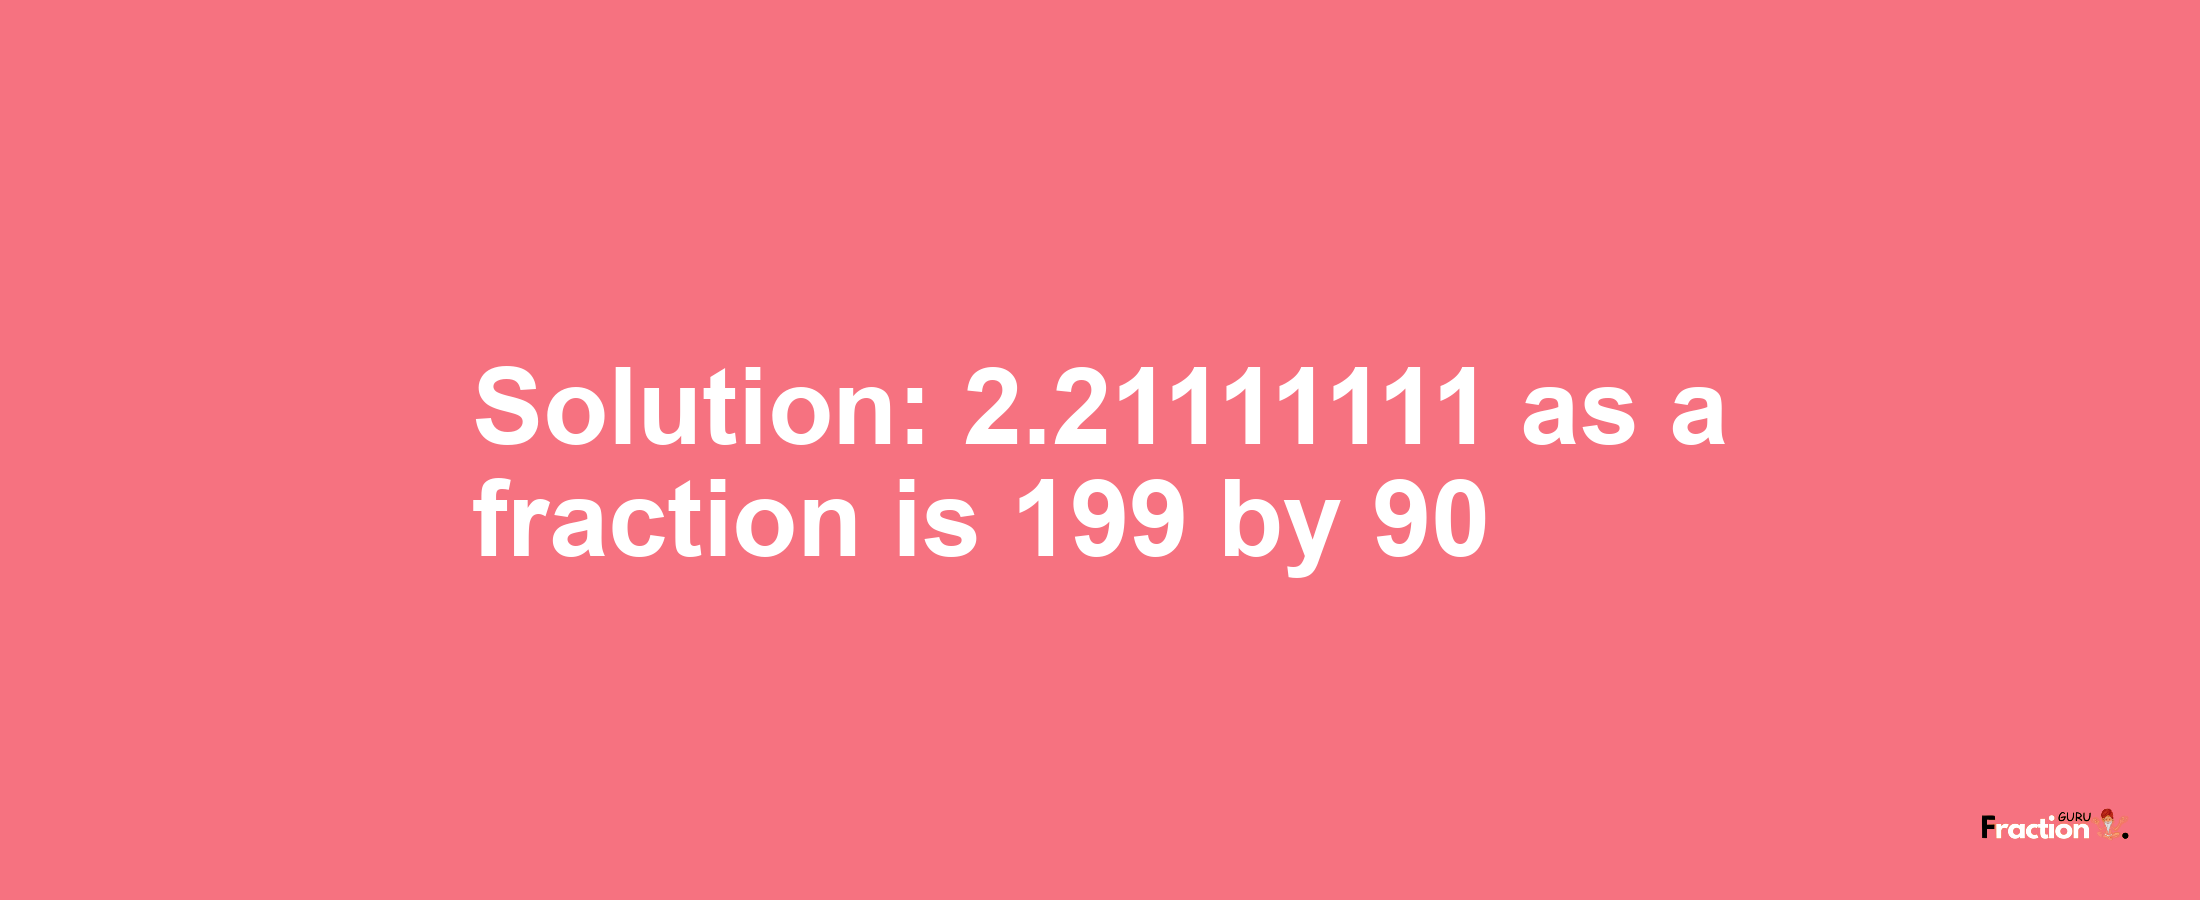 Solution:2.21111111 as a fraction is 199/90